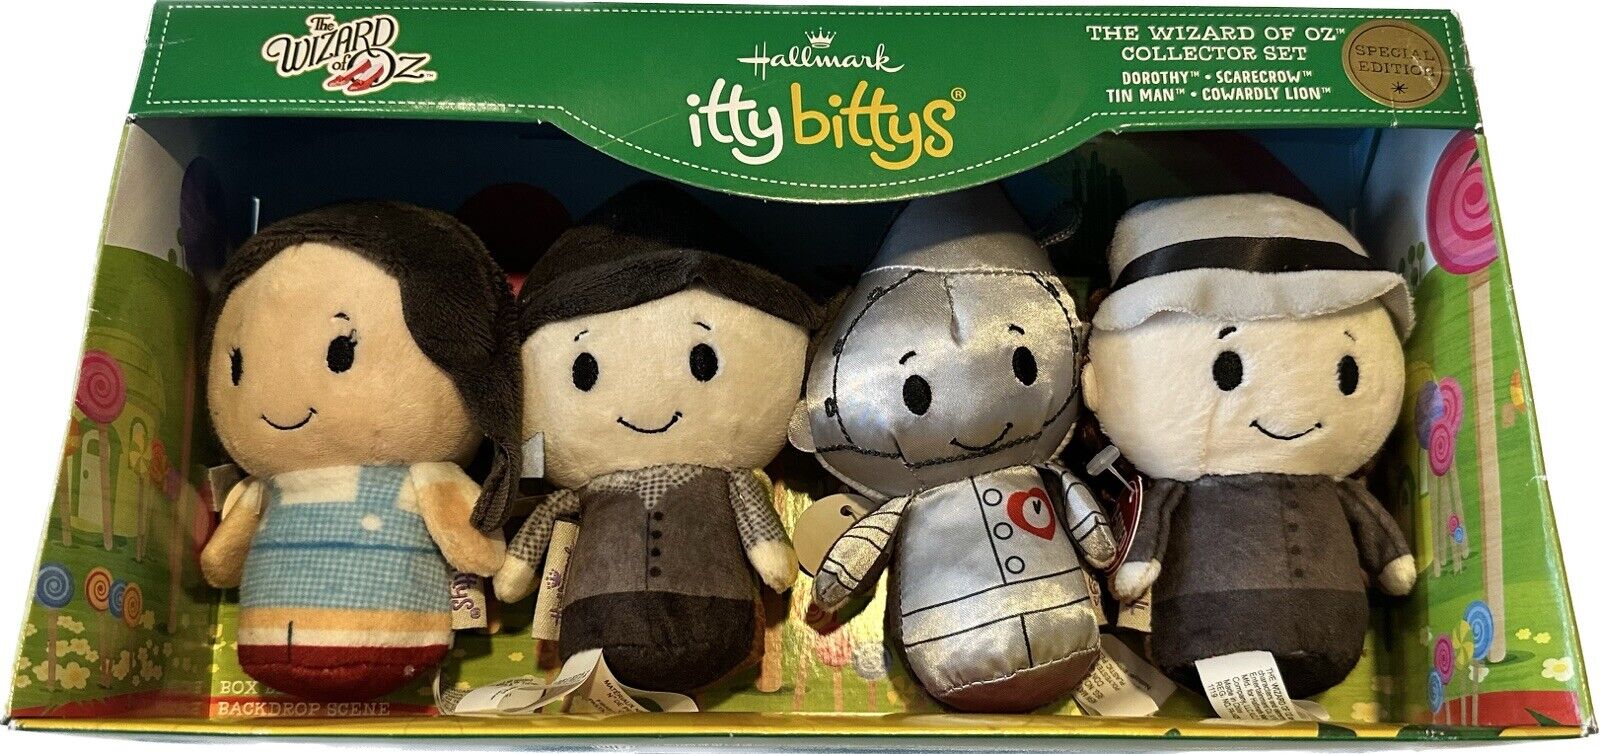 Hallmark Itty Bittys Wizard of Oz Collector Set of 4 Special Edition NIB NEW